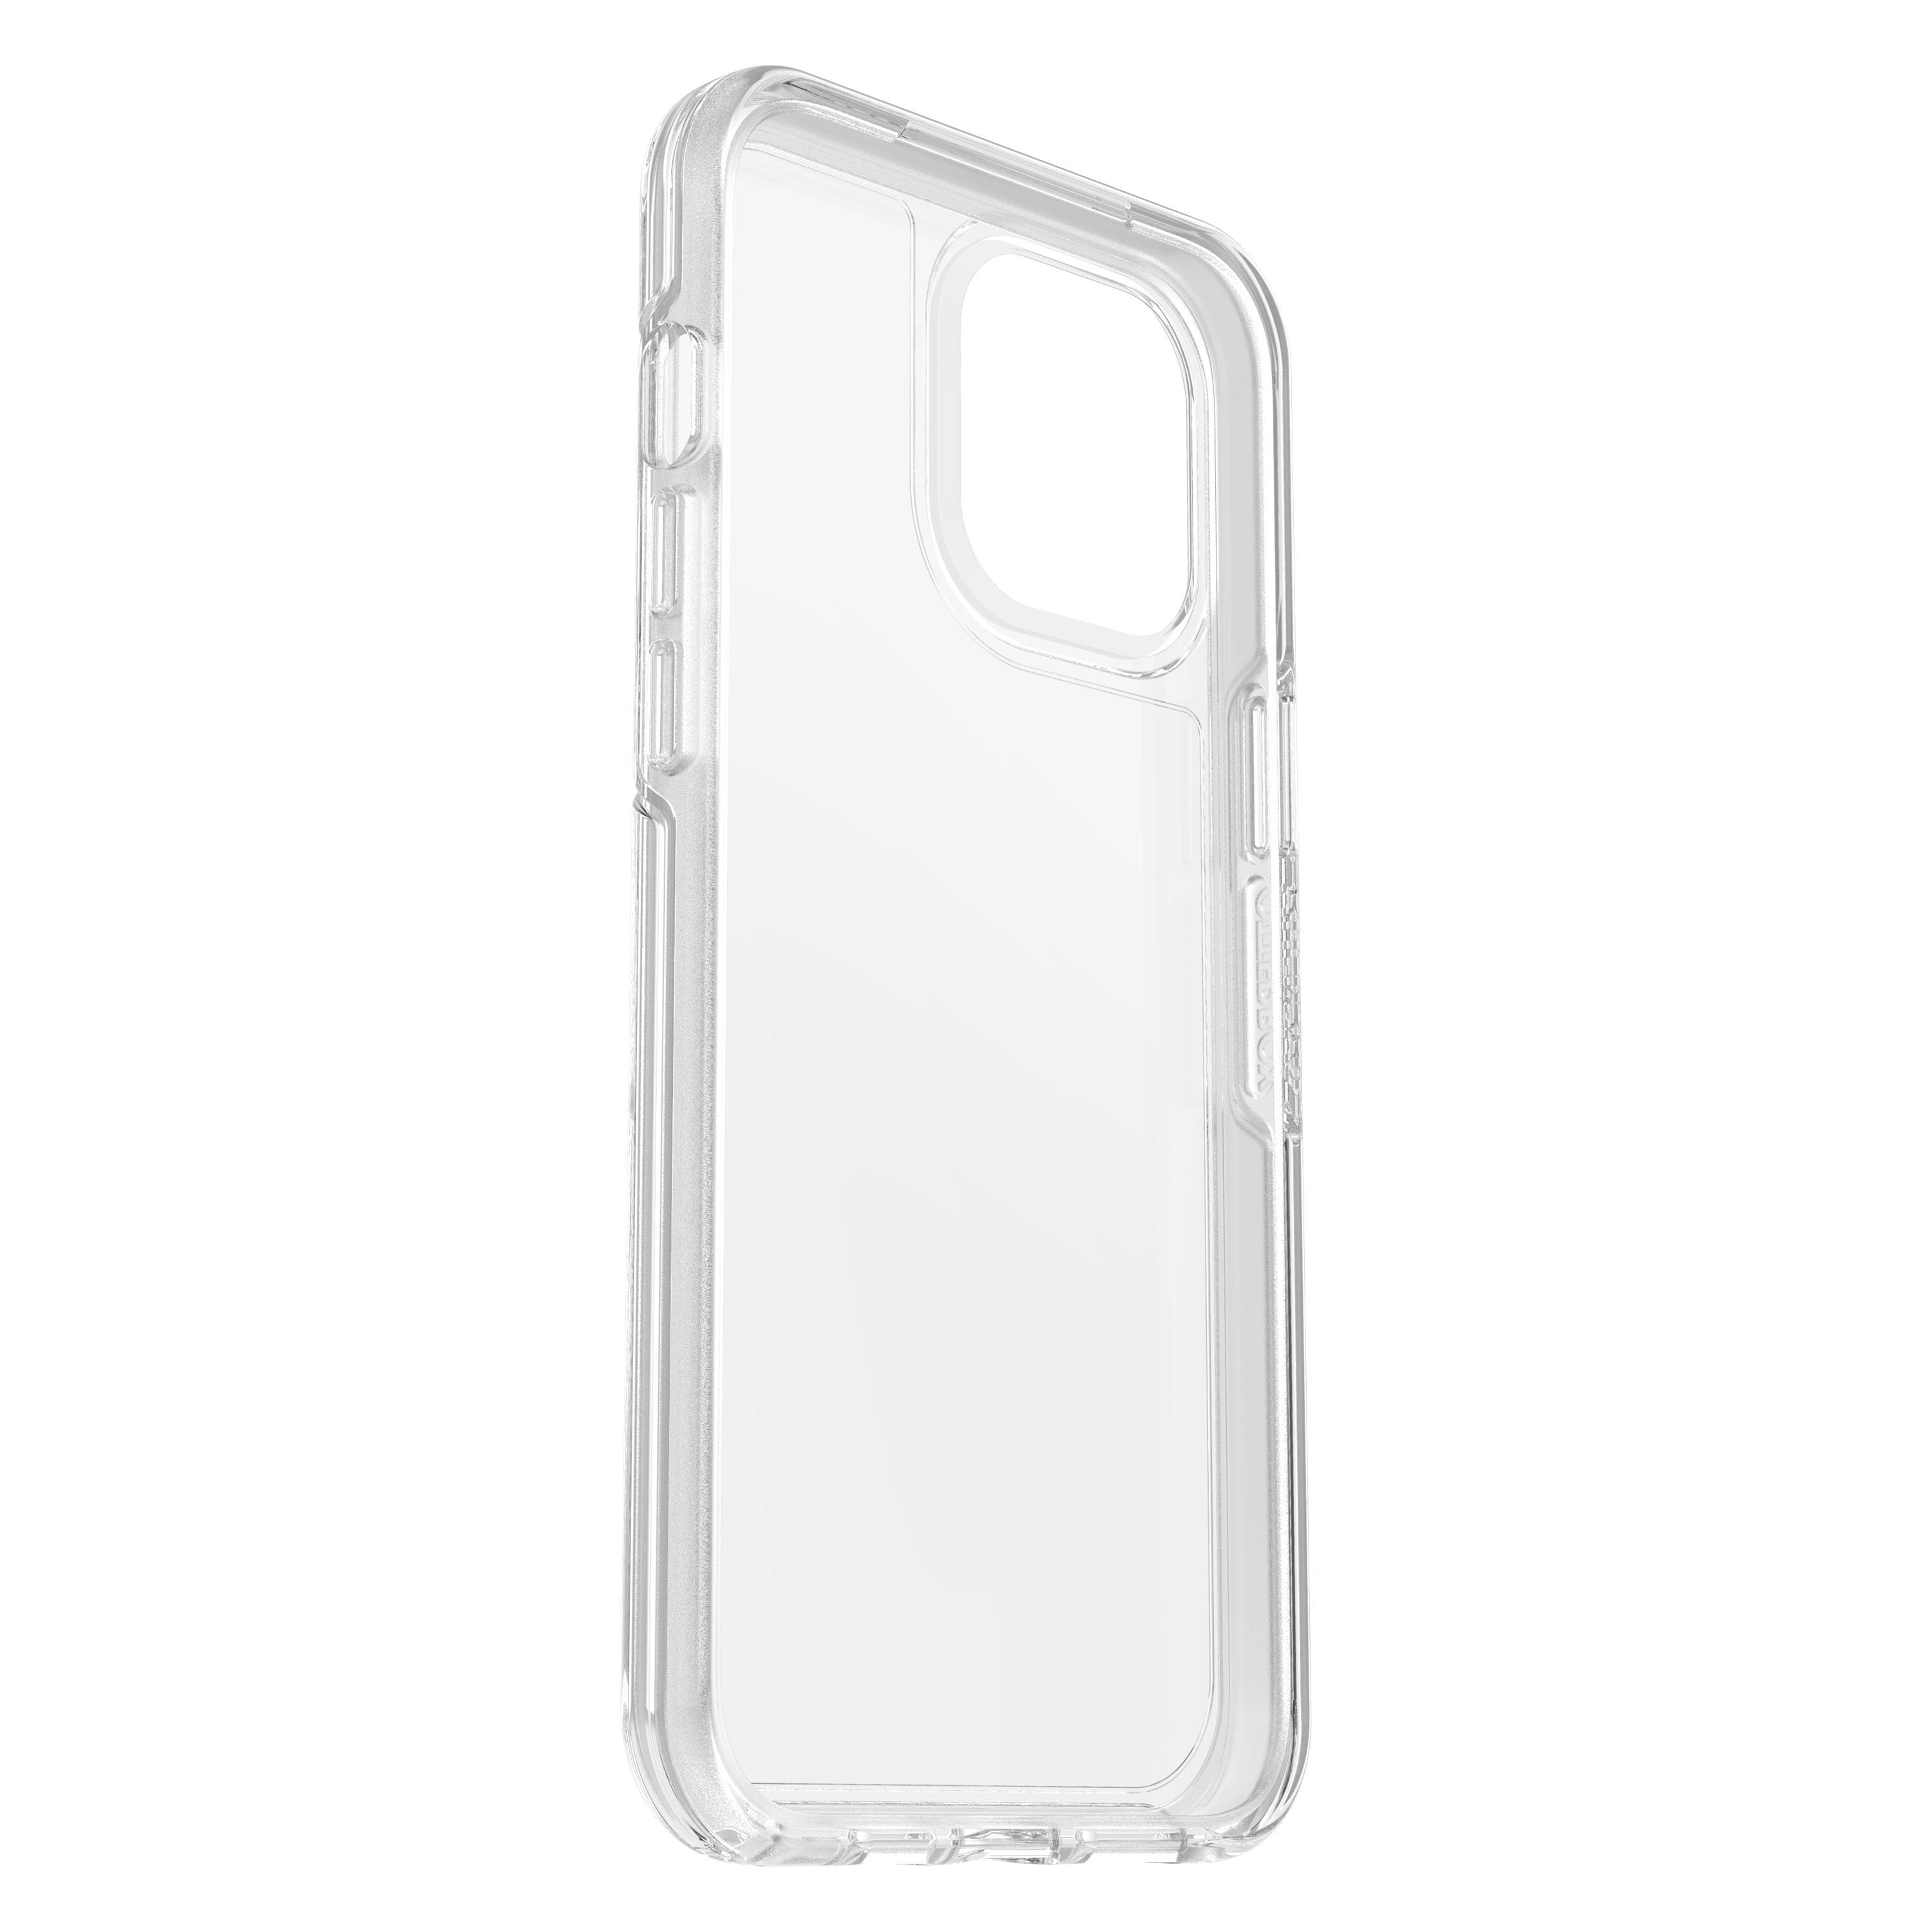 12 Glass, Transparent Pro Apple, Alpha Max, Symmetry + Clear OTTERBOX iPhone Backcover,